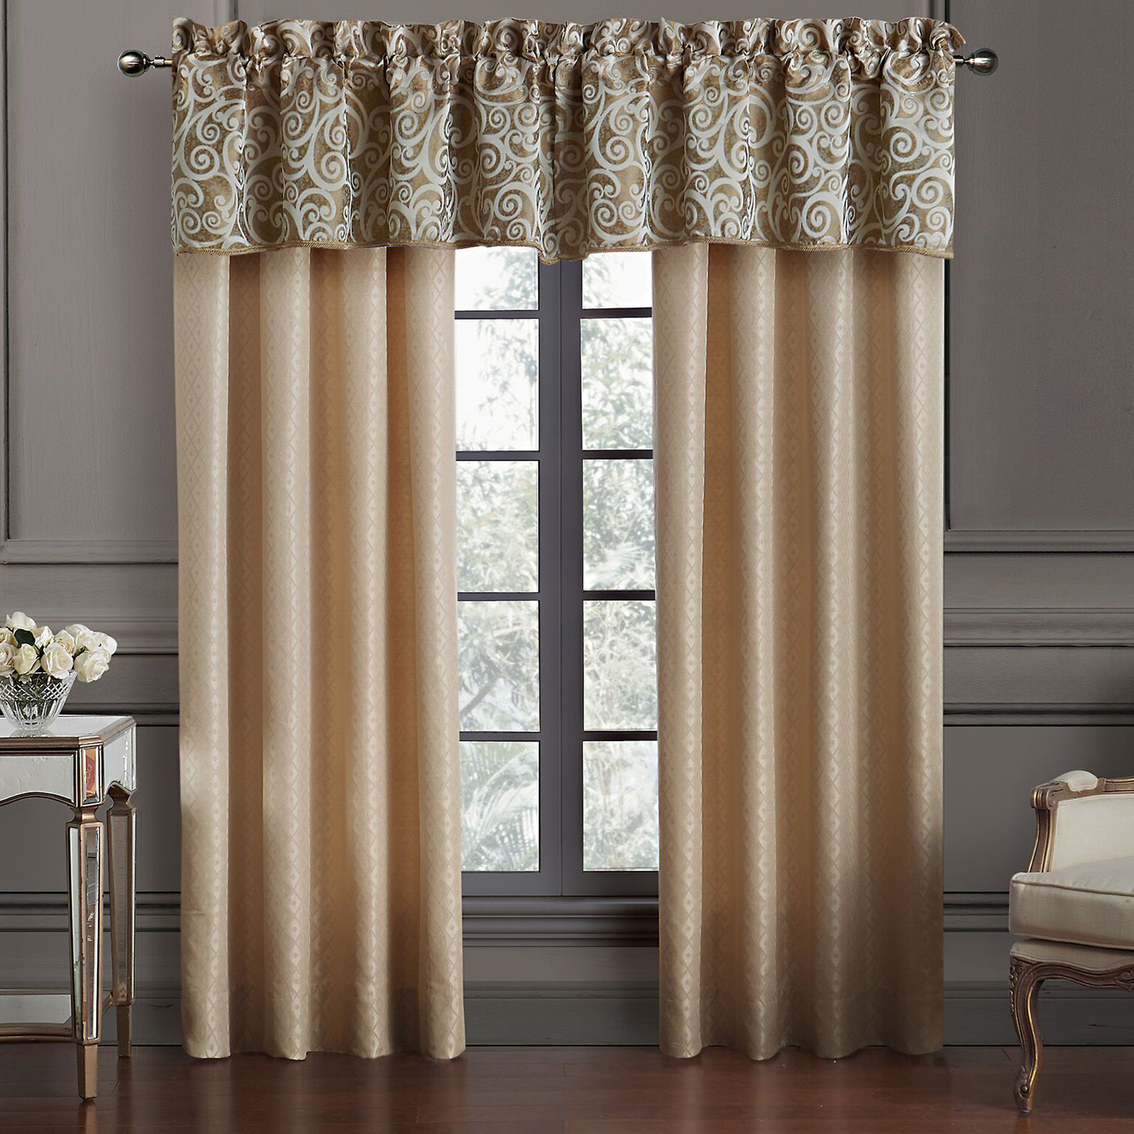 Waterford Anora Curtain Panels 2 pc. Set - Image 3 of 3